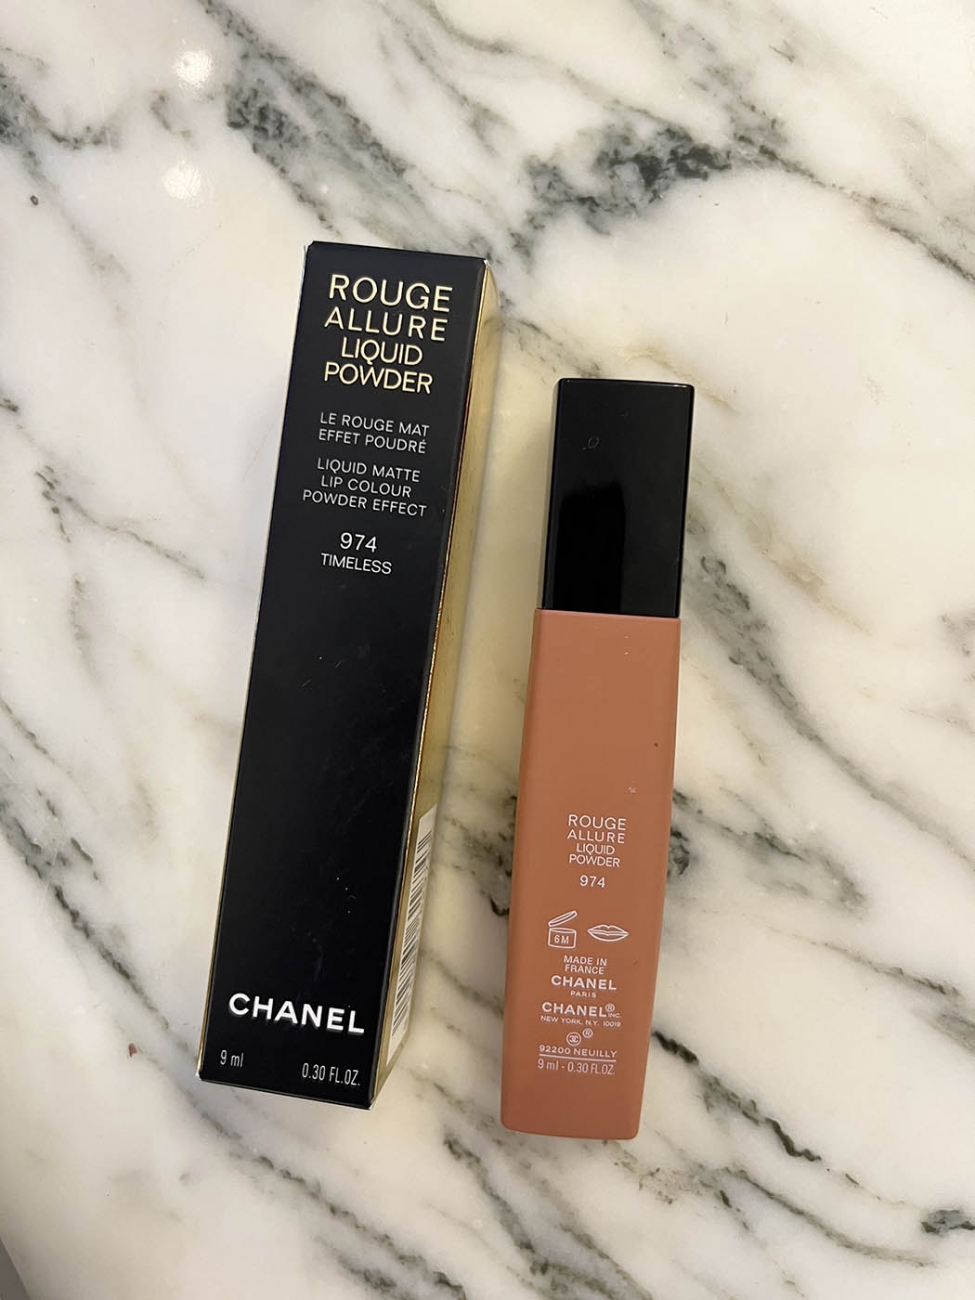 Boutique CHANEL LE ROUGE ALLURE Liquid Powder lipstick in pink 974 Timeless